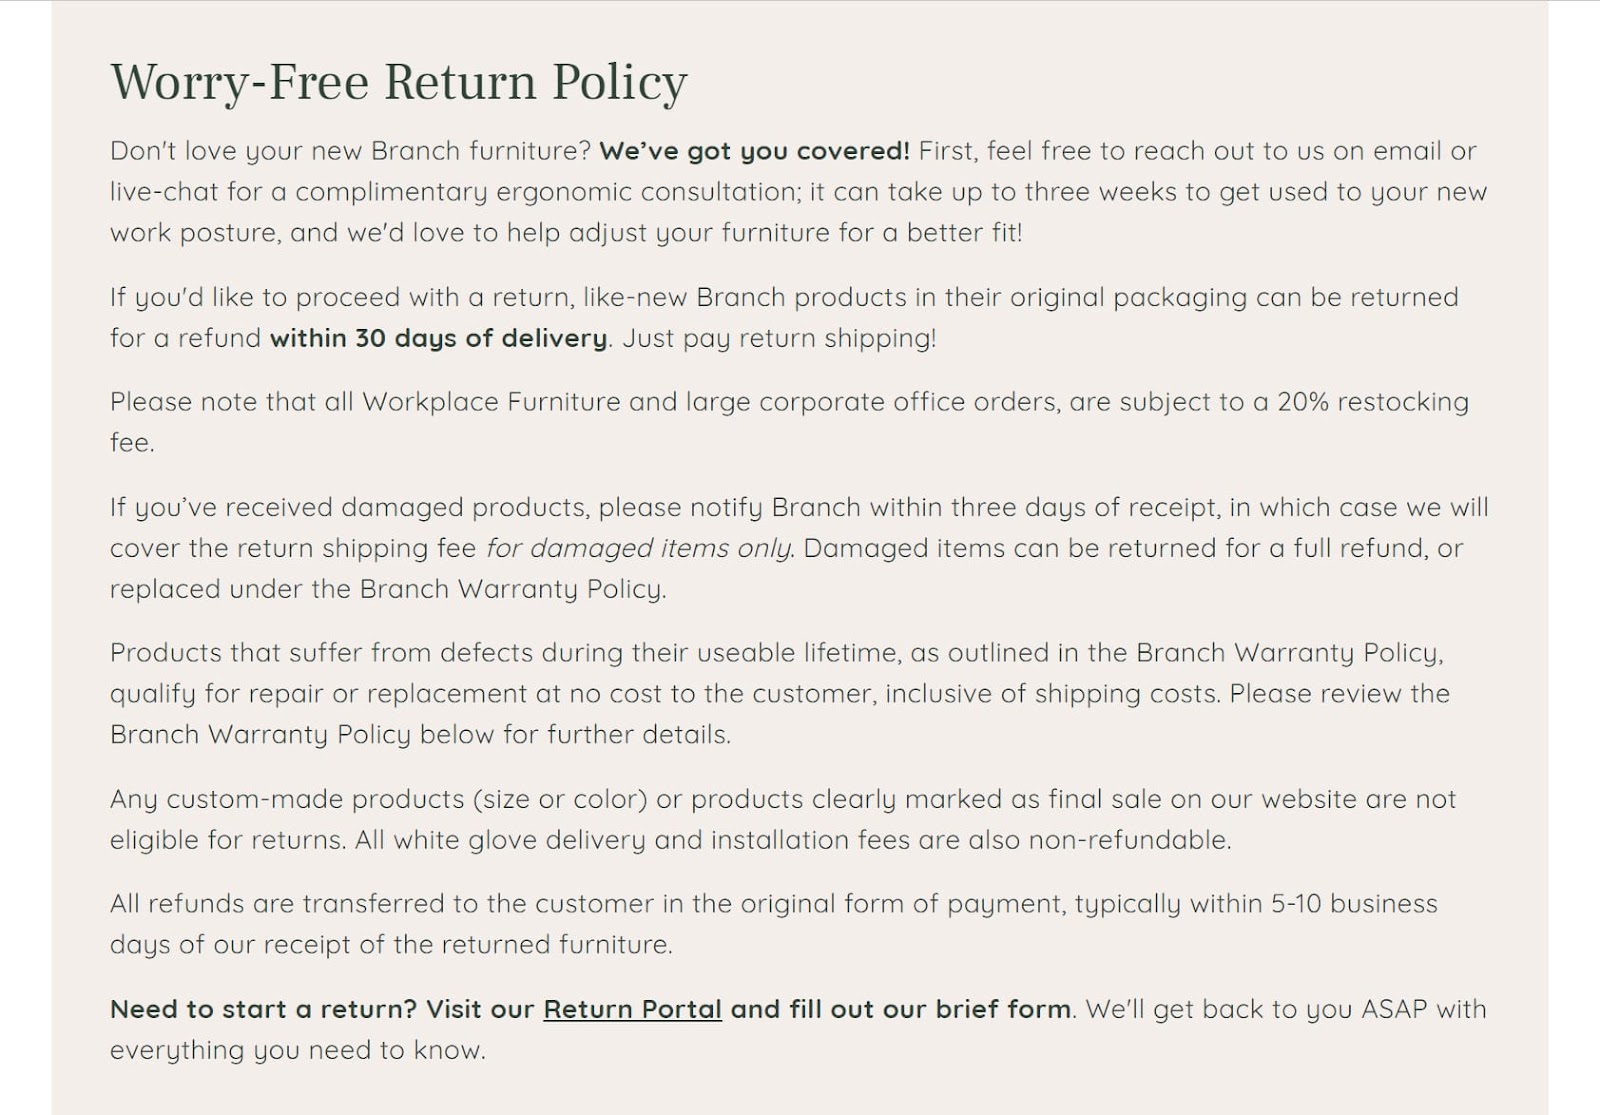 branch worry free return policy page text